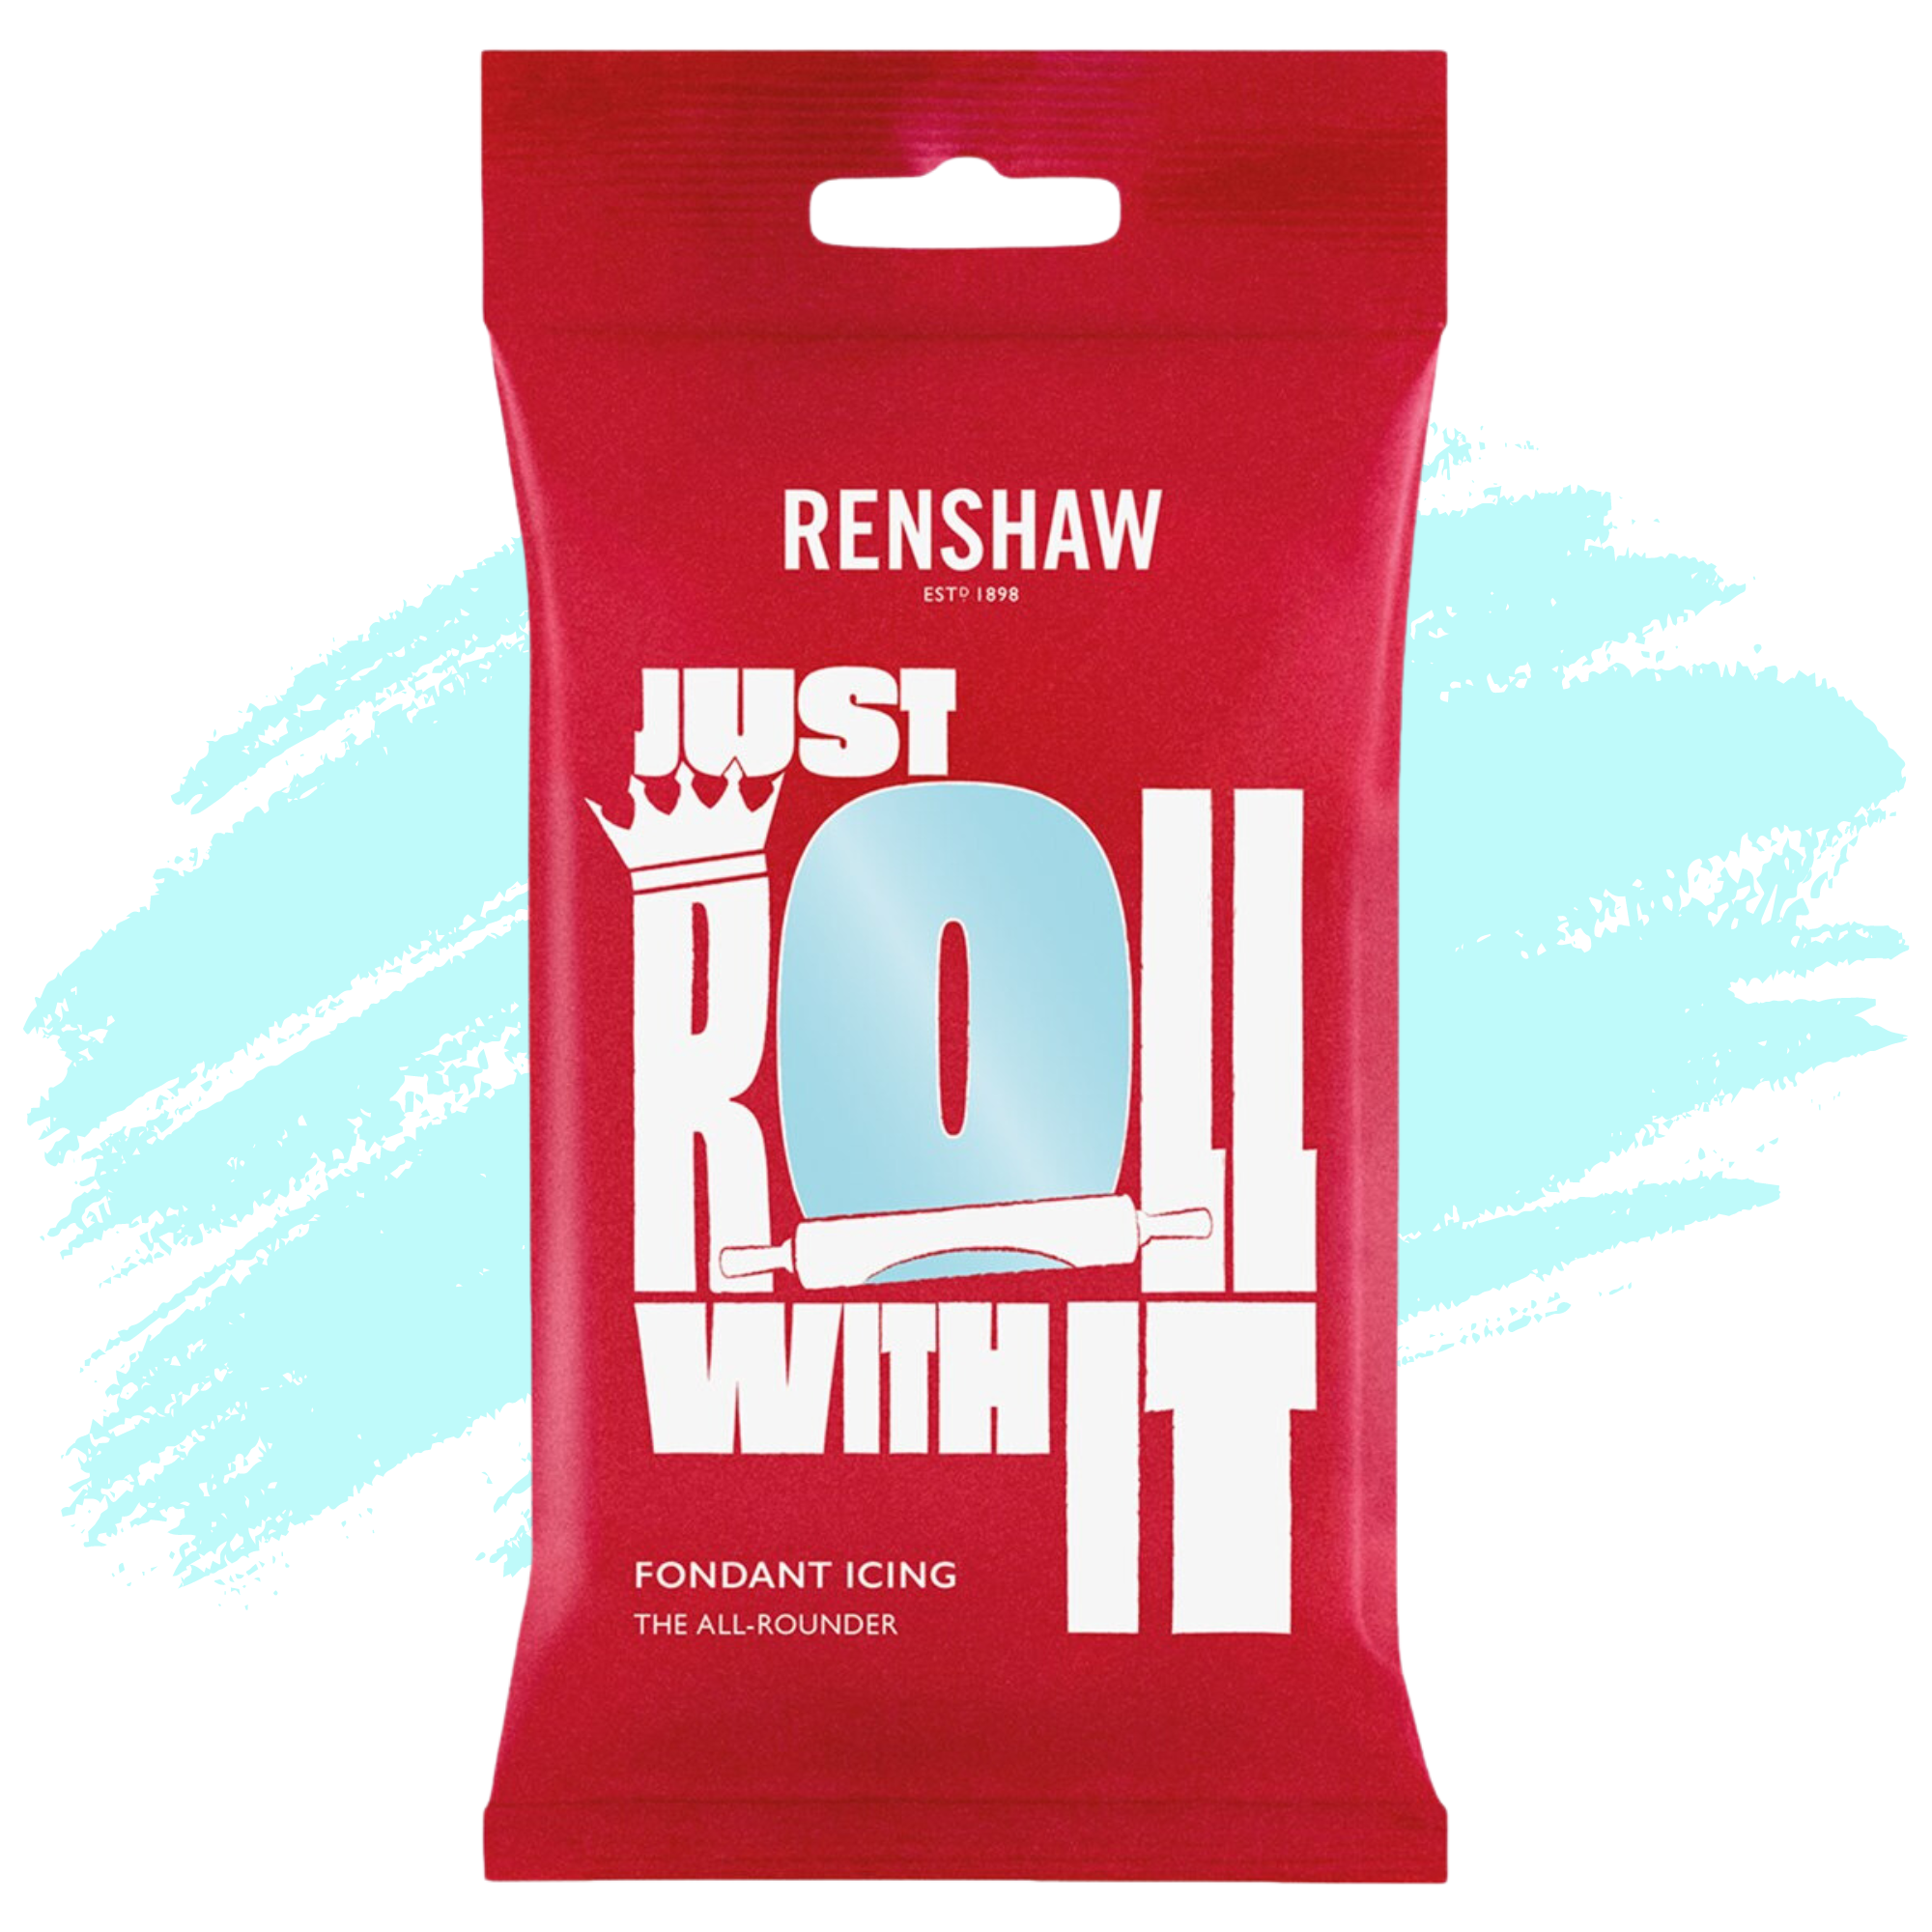 Renshaw Professional Sugar Paste Ready to Roll Fondant Just Roll with it Icing - Duck Egg Blue - 250g